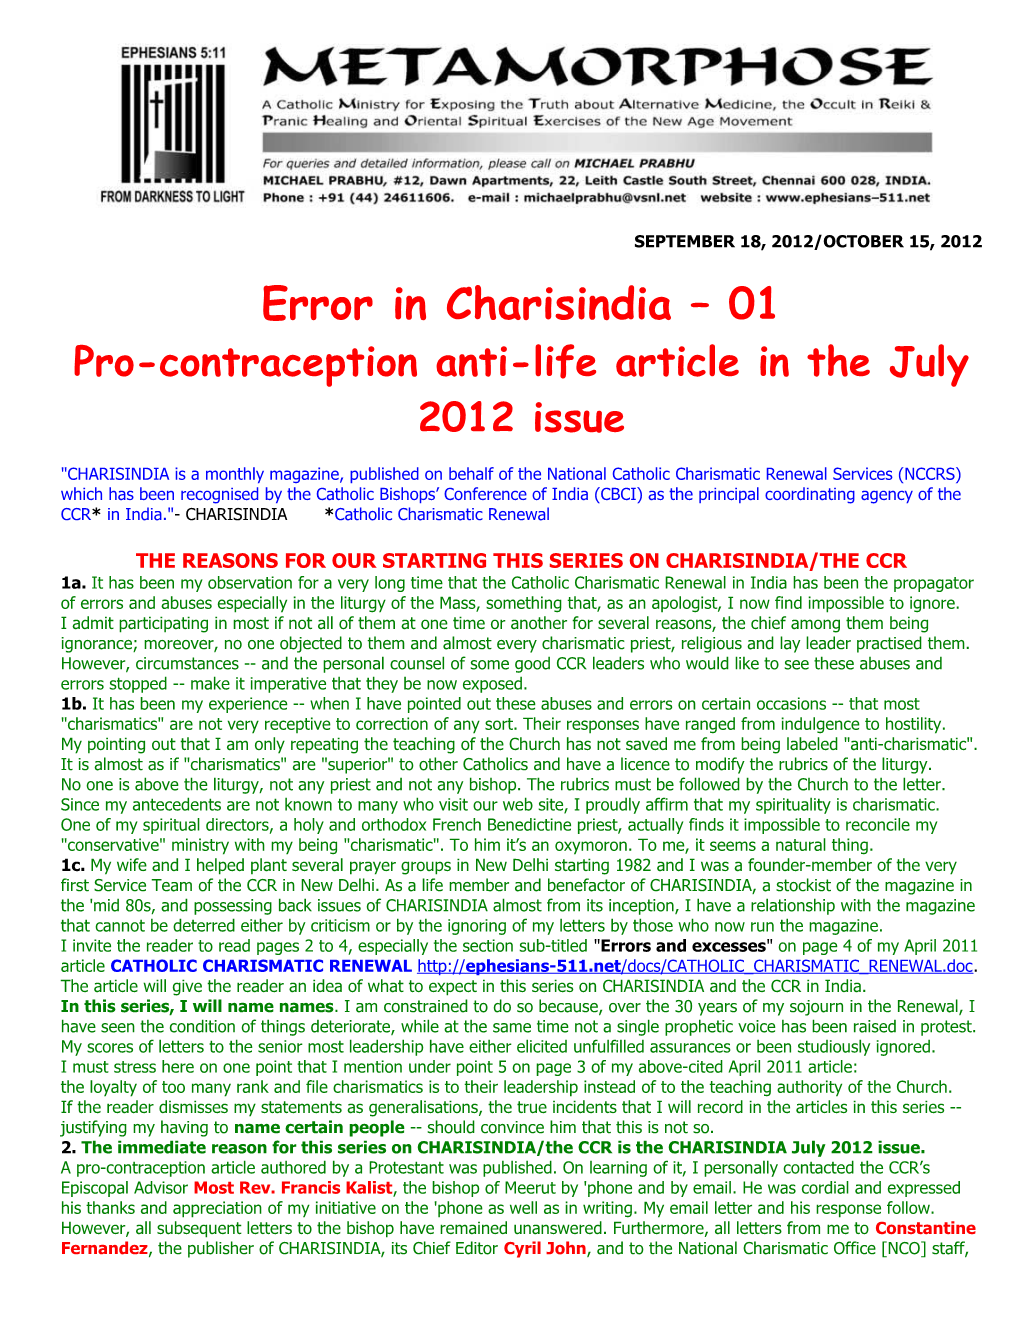 Pro-Contraception Anti-Life Article in the July 2012 Issue